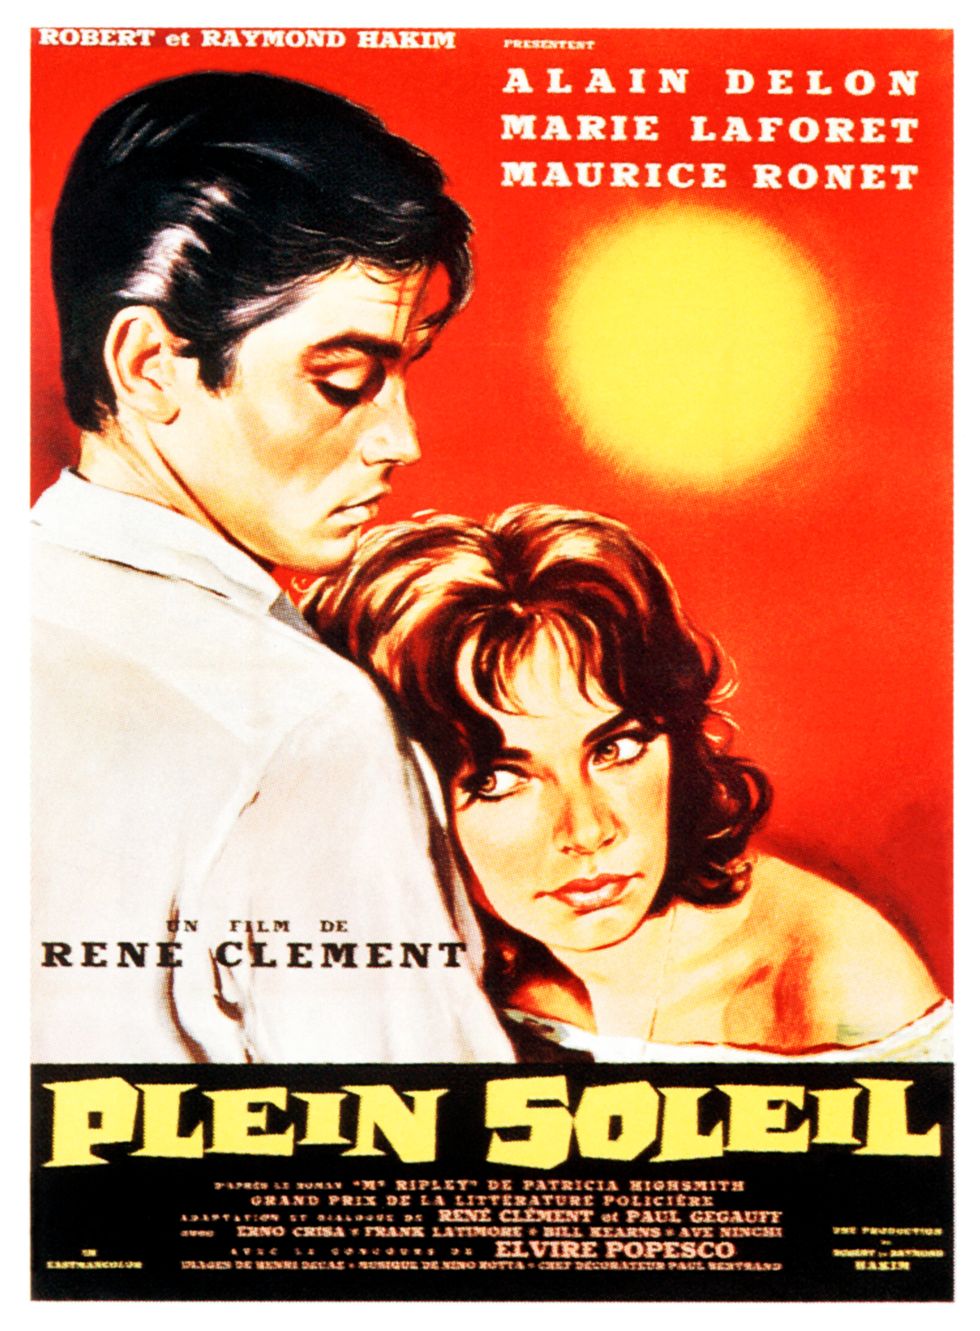 purple noon, poster, aka plein soleil, from left alain delon, marie laforet on french poster art, 1960 photo by lmpc via getty images